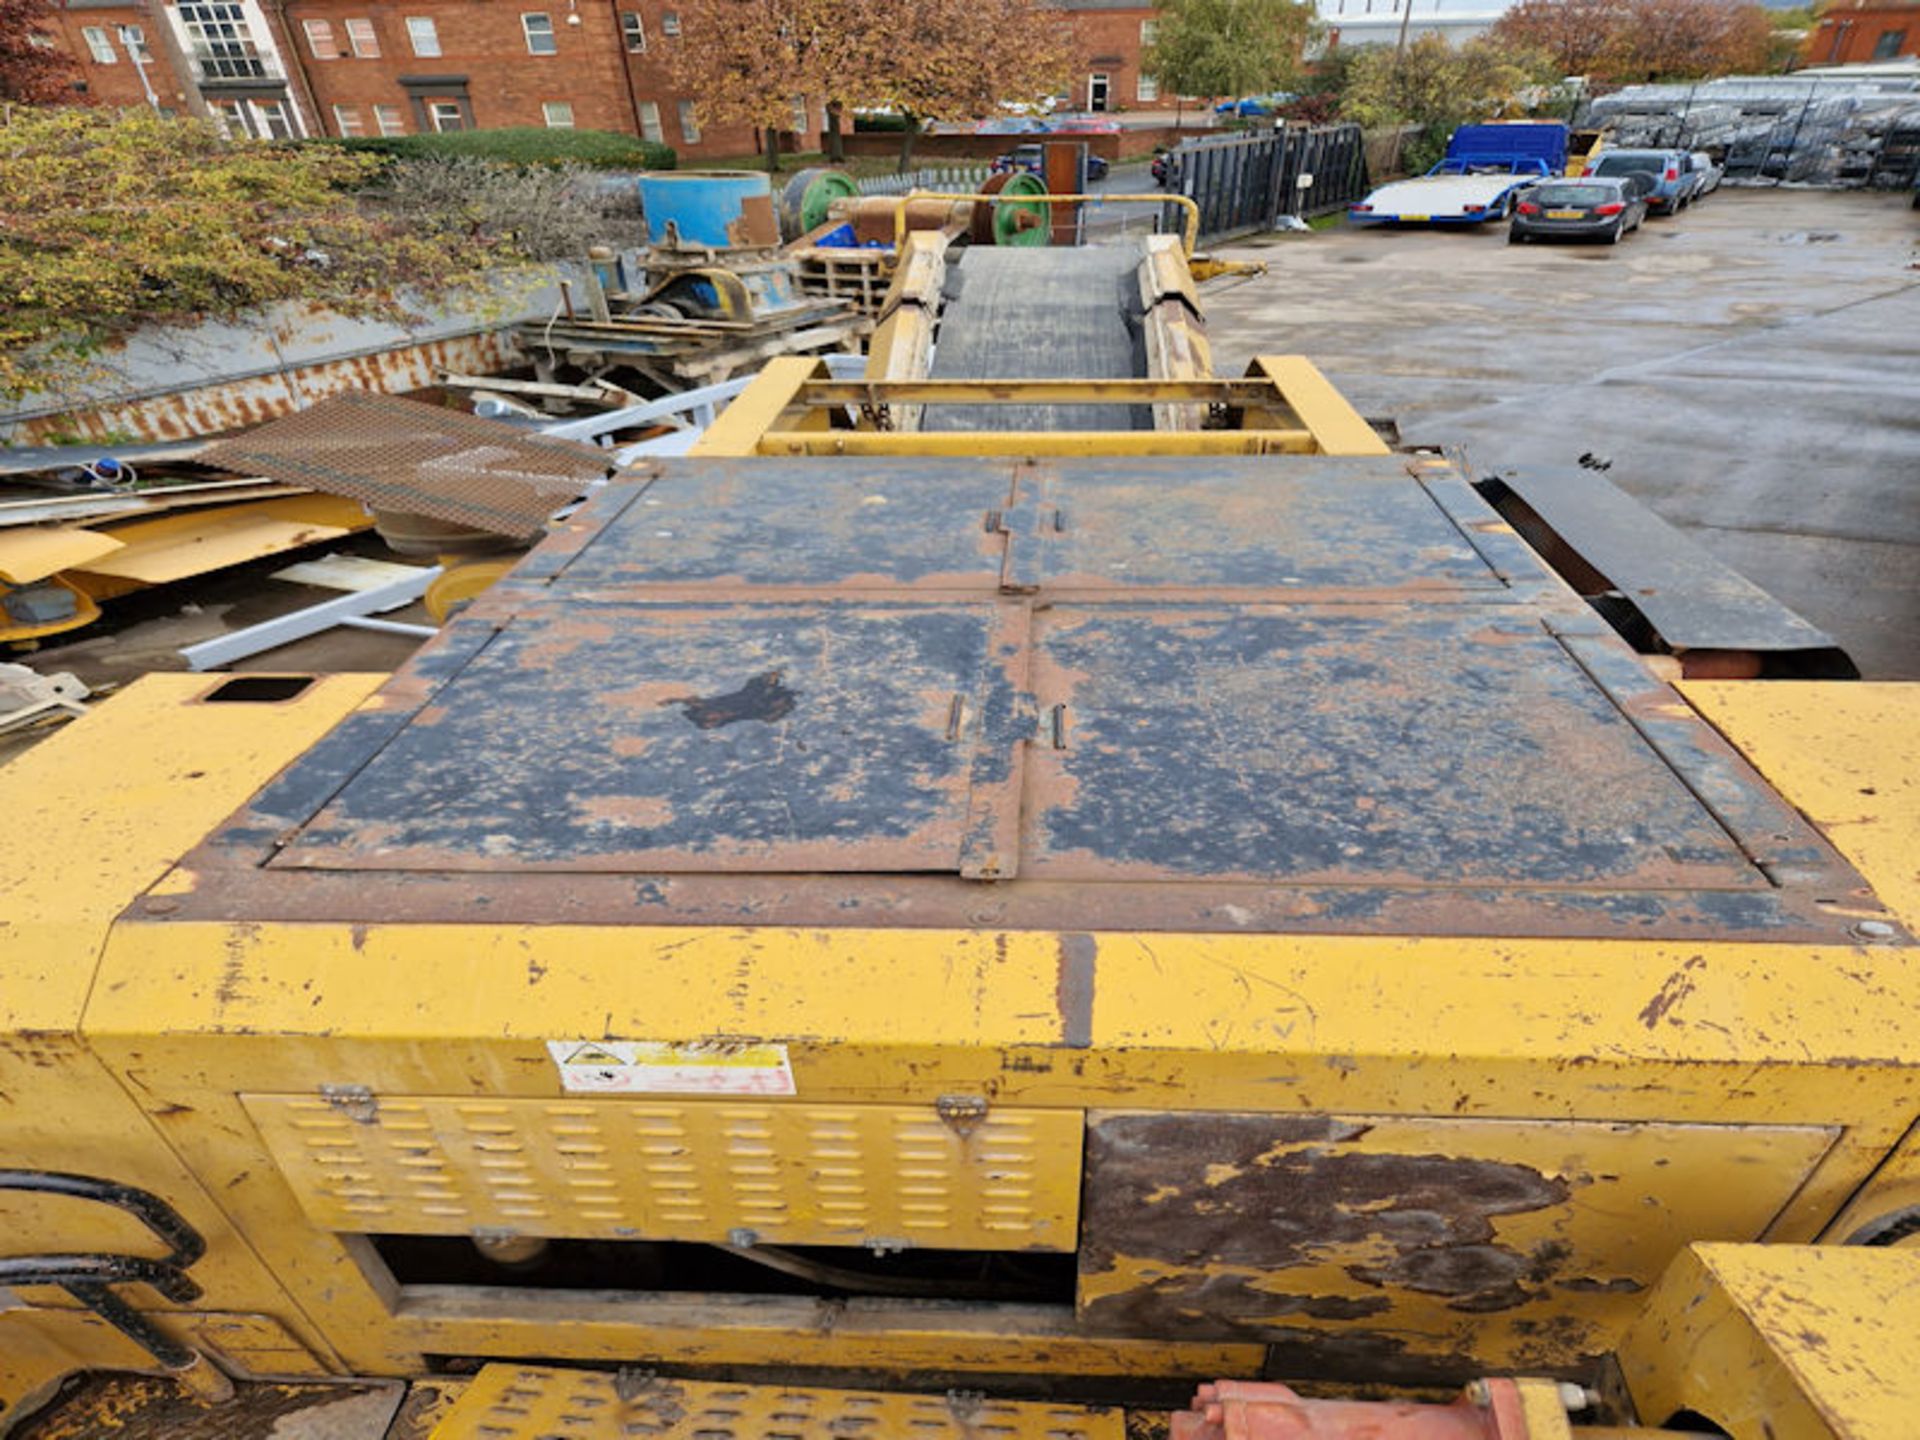 2007 Extec C12+ Tracked Jaw Crusher - Image 34 of 34